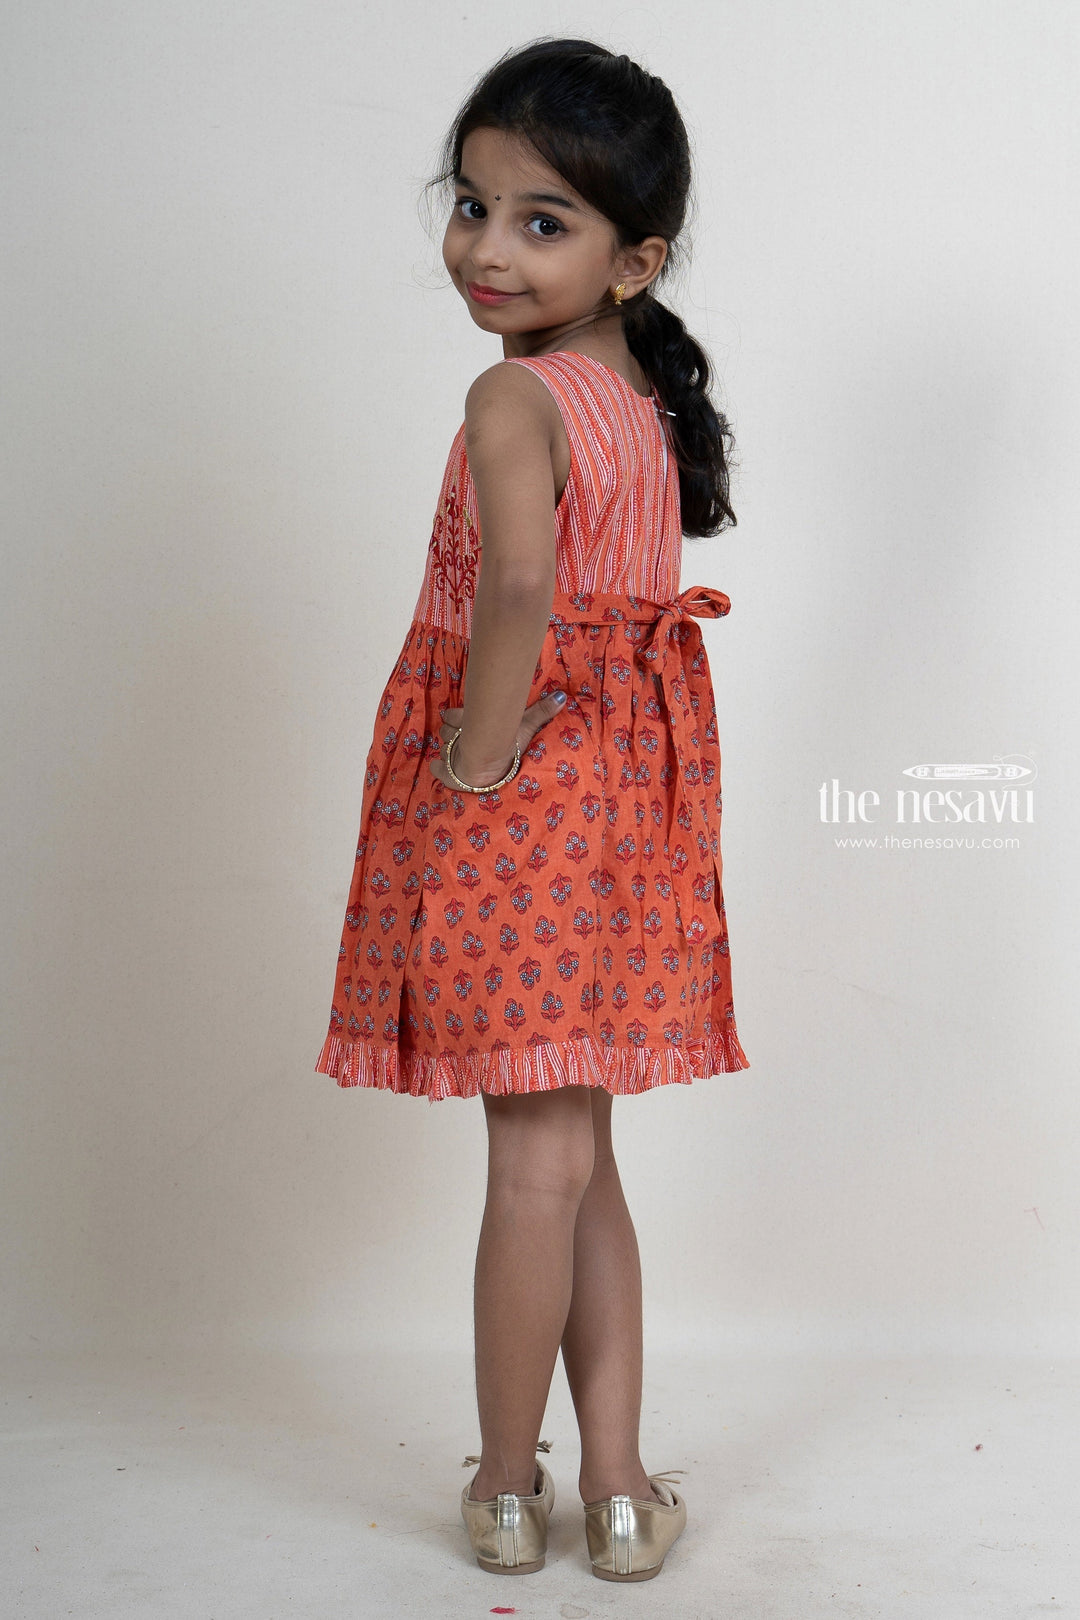 The Nesavu Frocks & Dresses Brown Soft Cotton Printed Gown For Girls With Embroidery Motif psr silks Nesavu